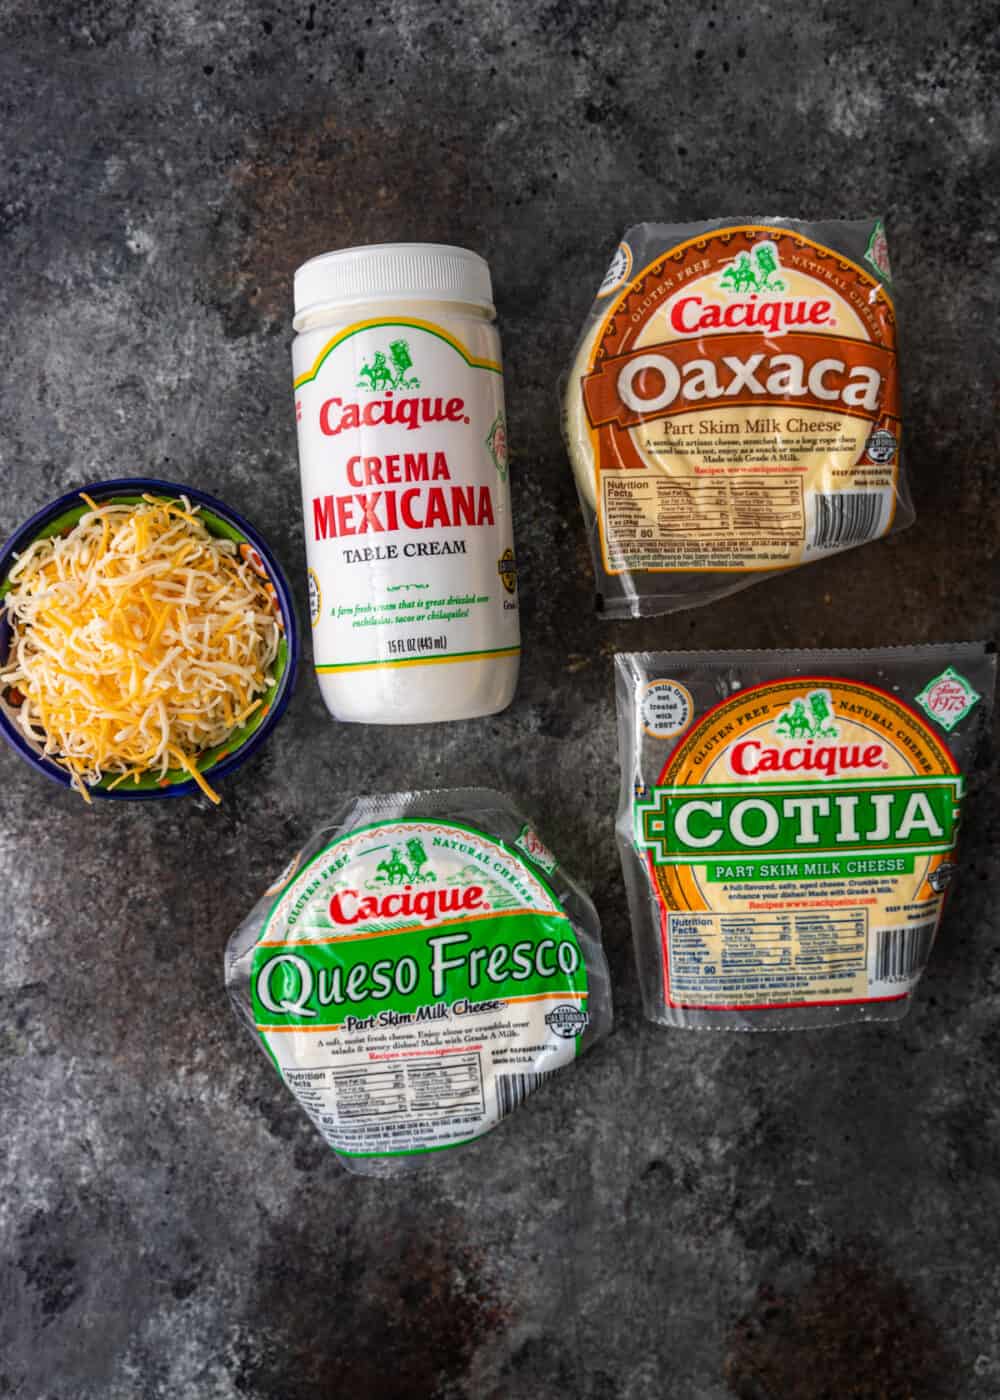 queso fresco, cotija, shredded cheese, crema mexicana cheese and oaxaca cheese on counter